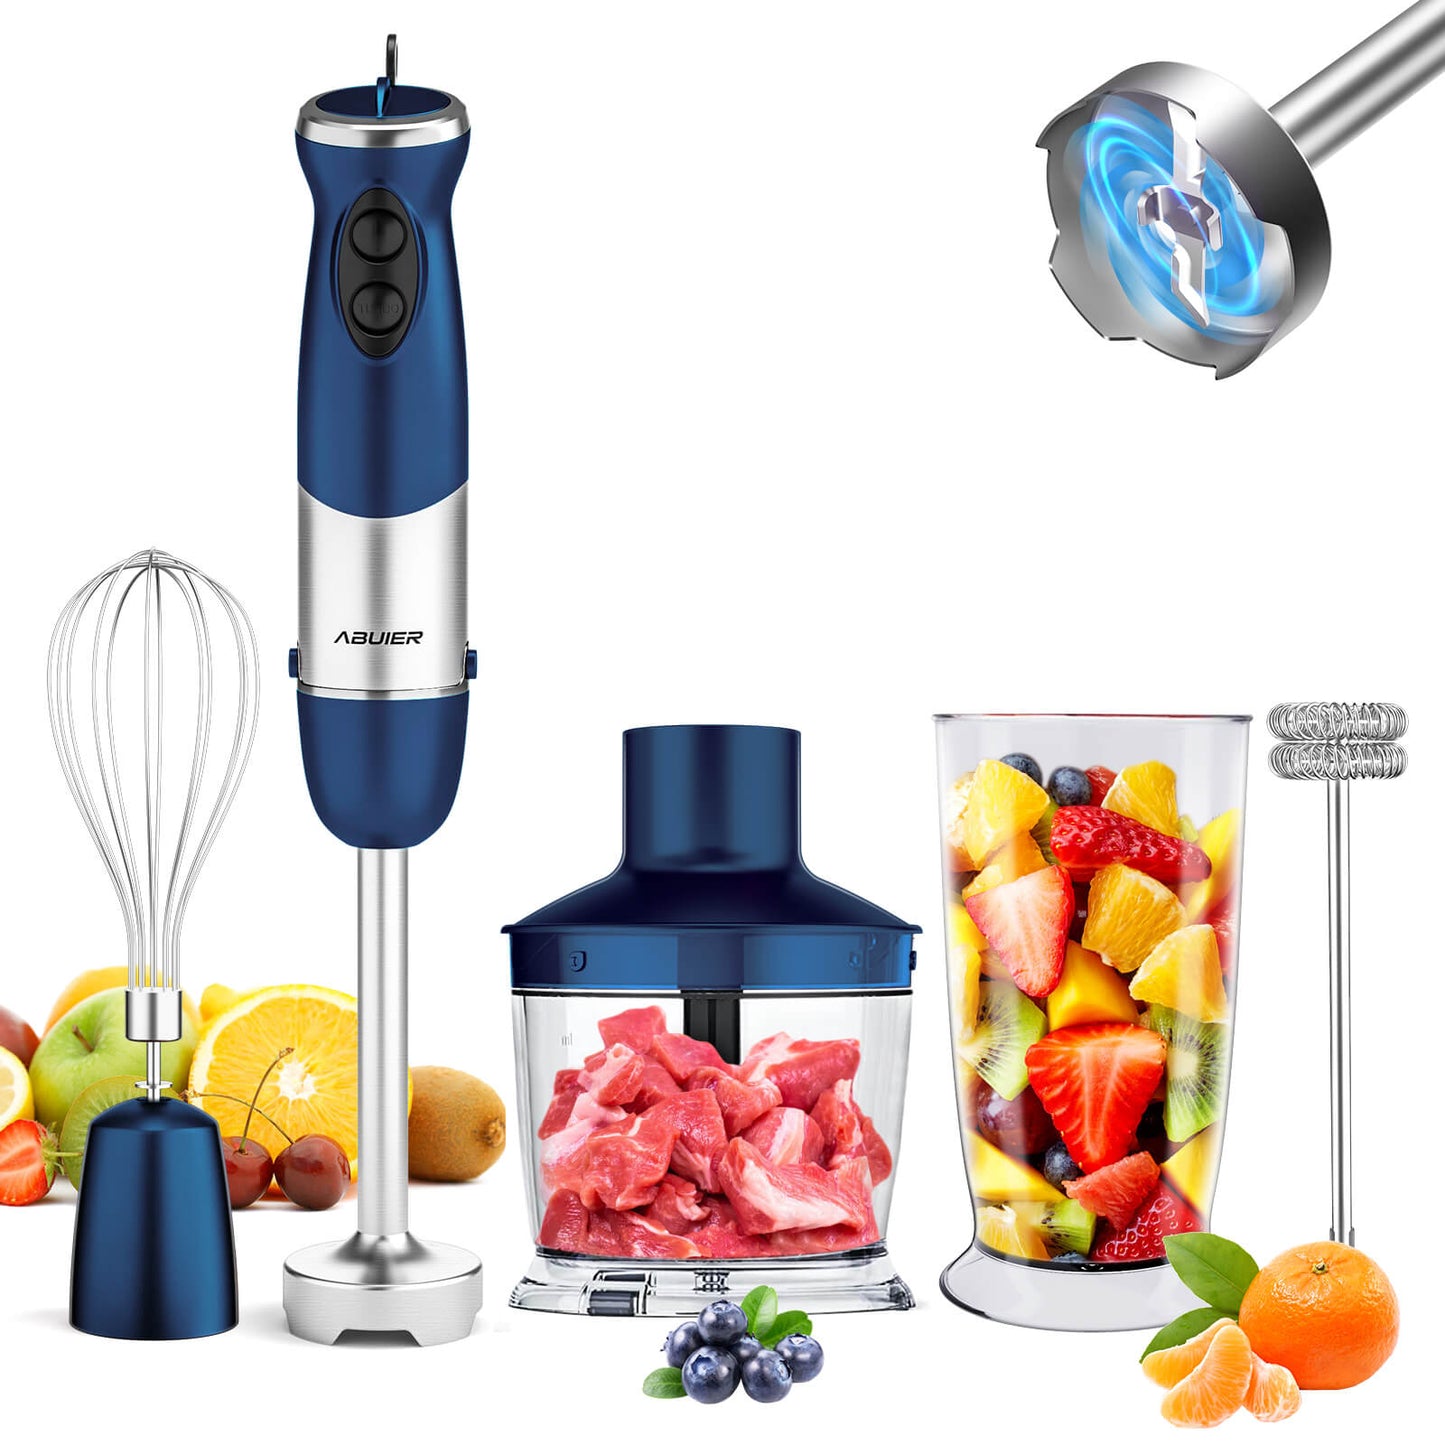 Food processor, blender, hand blenderwhich one and when?